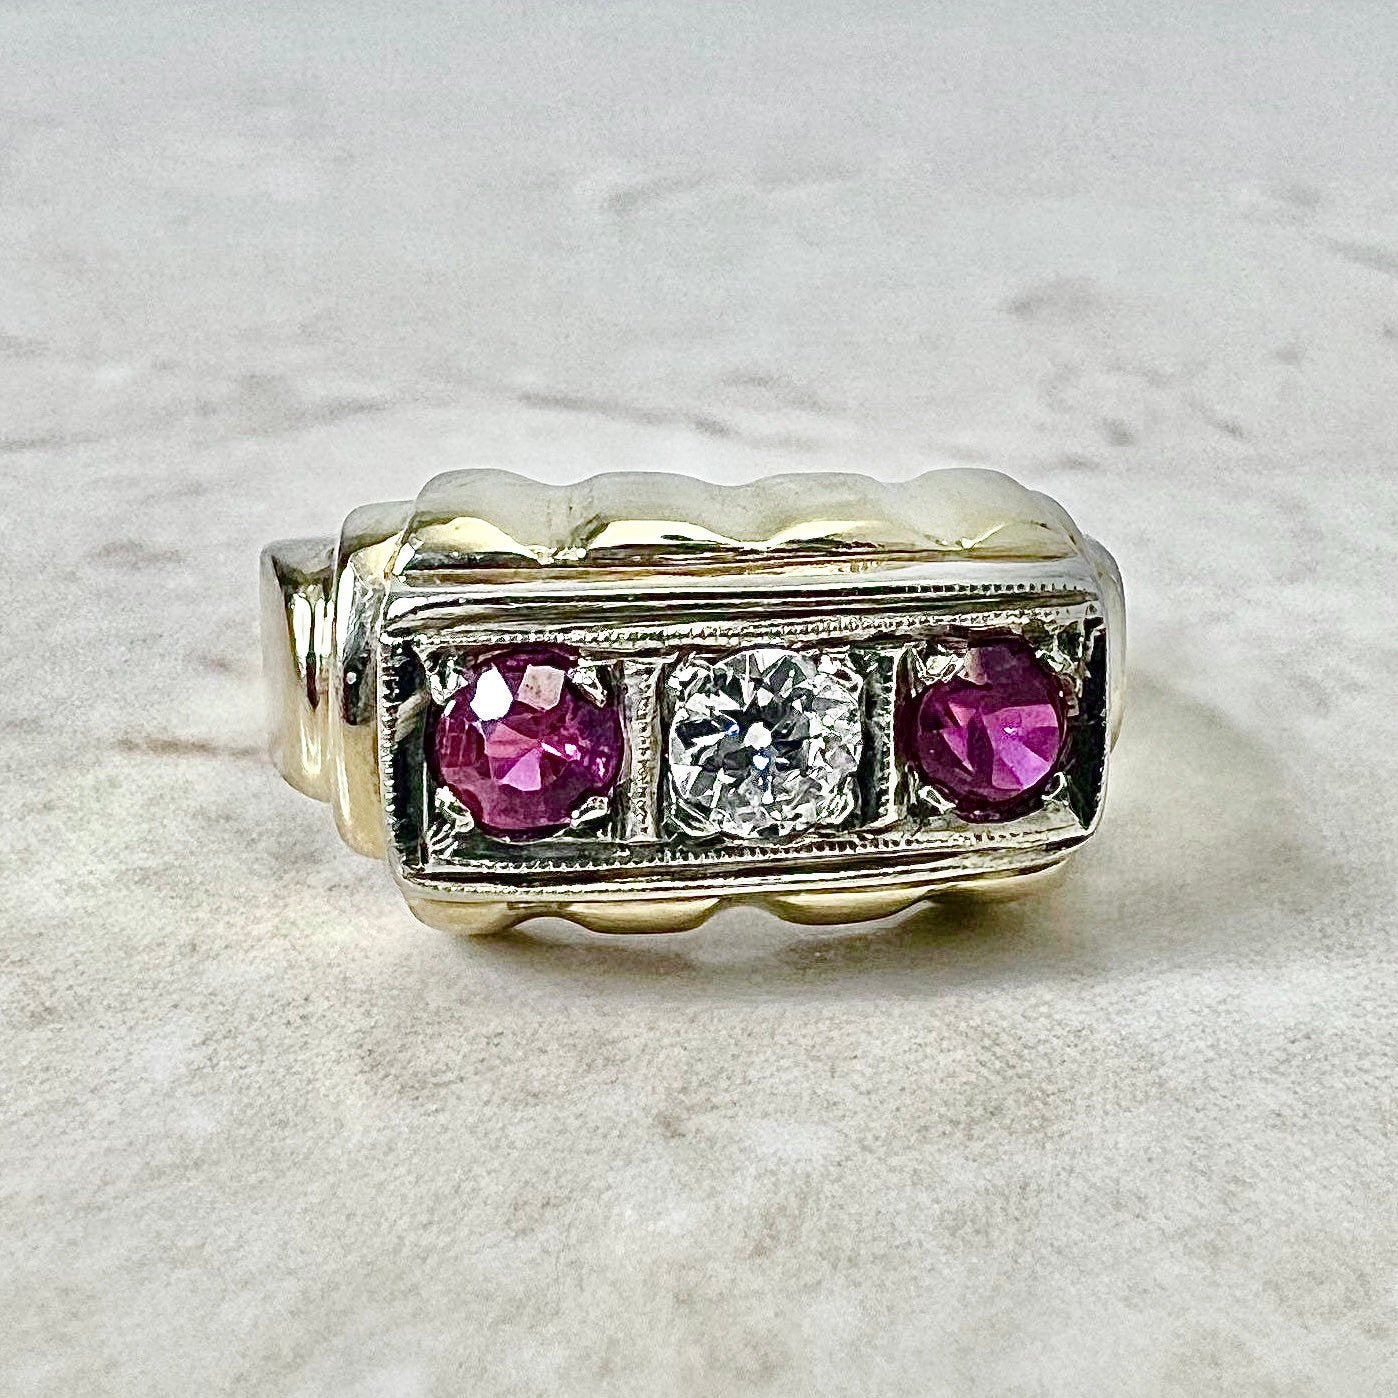 Fine Vintage Retro 14K Diamond & Synthetic Ruby Cocktail Ring - Gold Retro Ring - Circa 1940 - Valentine’s Day Gift For Her - Jewelry Sale